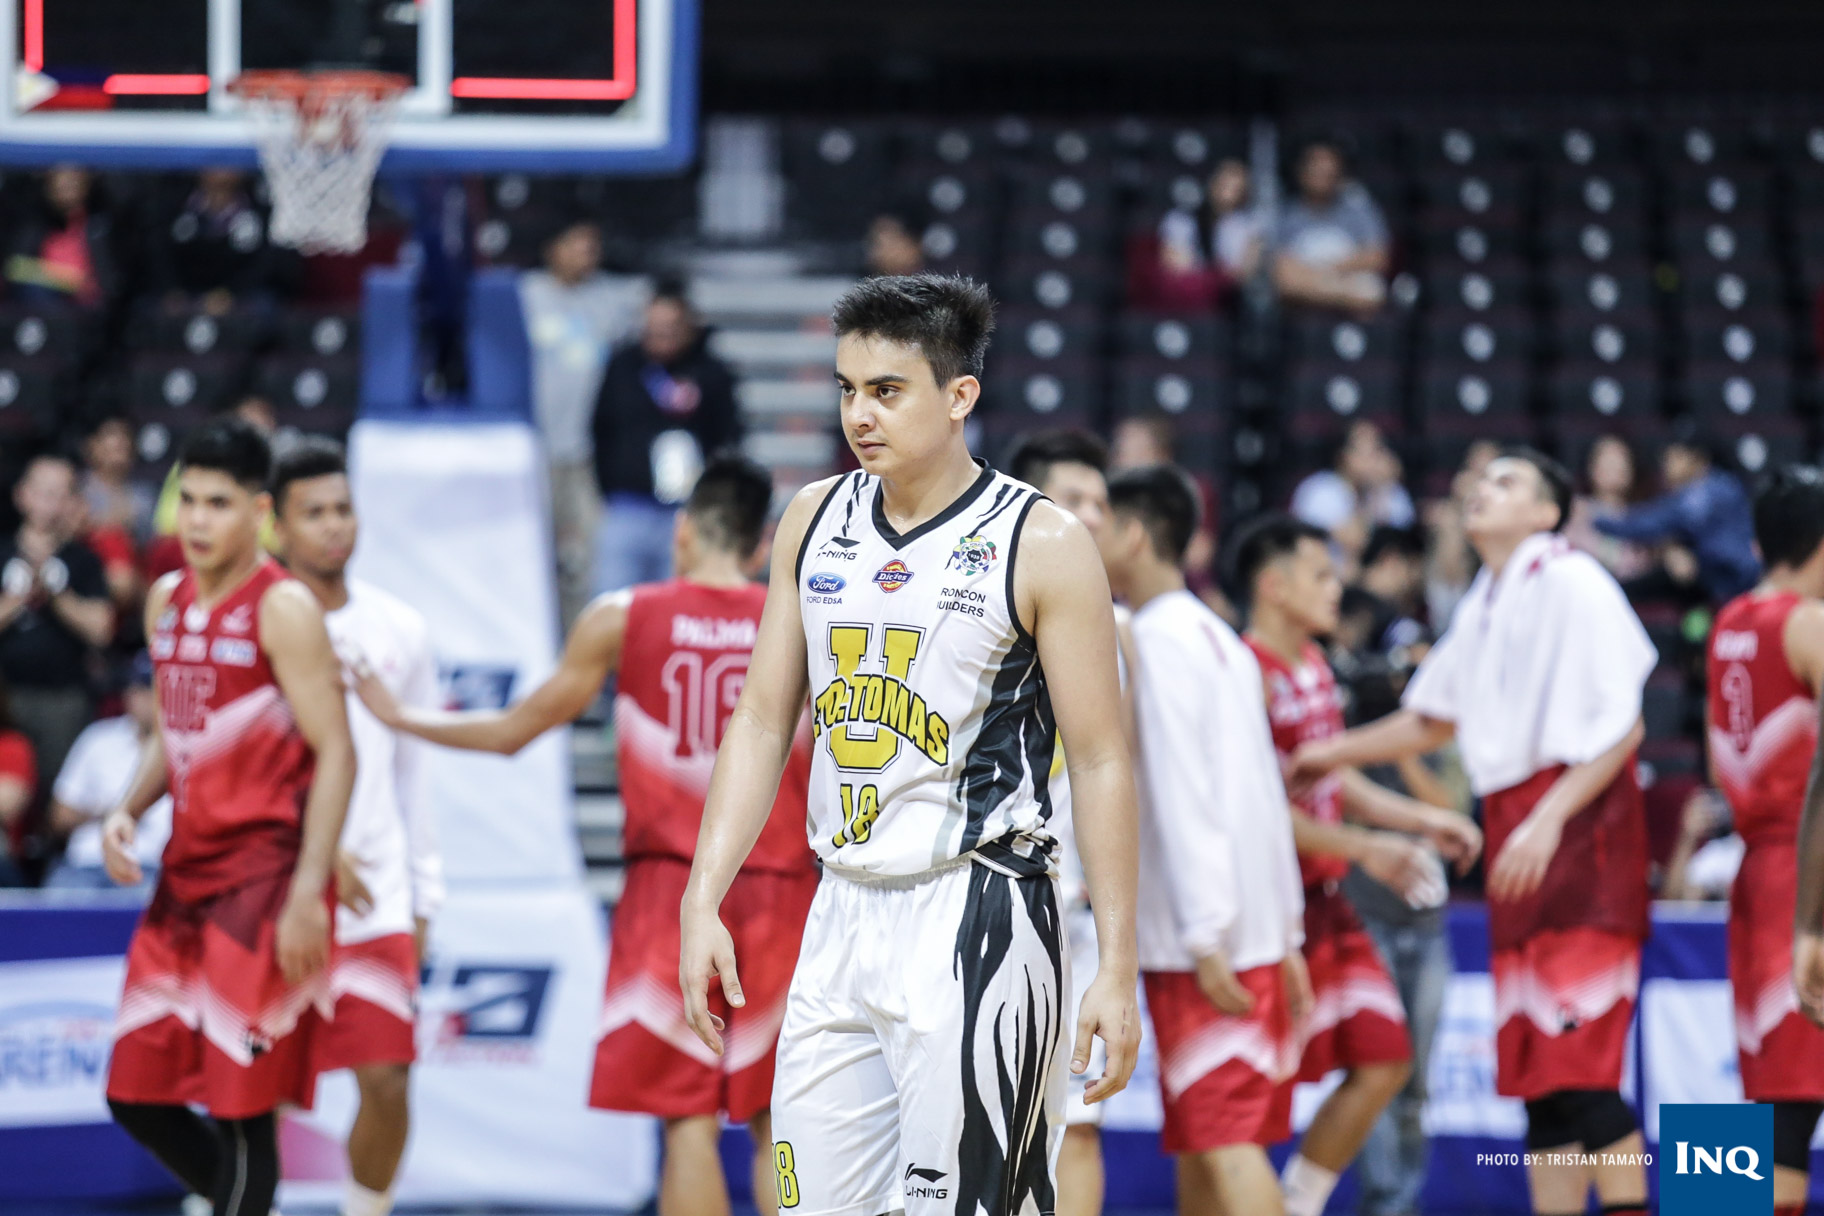 UST's Louie Vigil reacts after another loss. Photo by Tristan Tamayo/INQUIRER.net